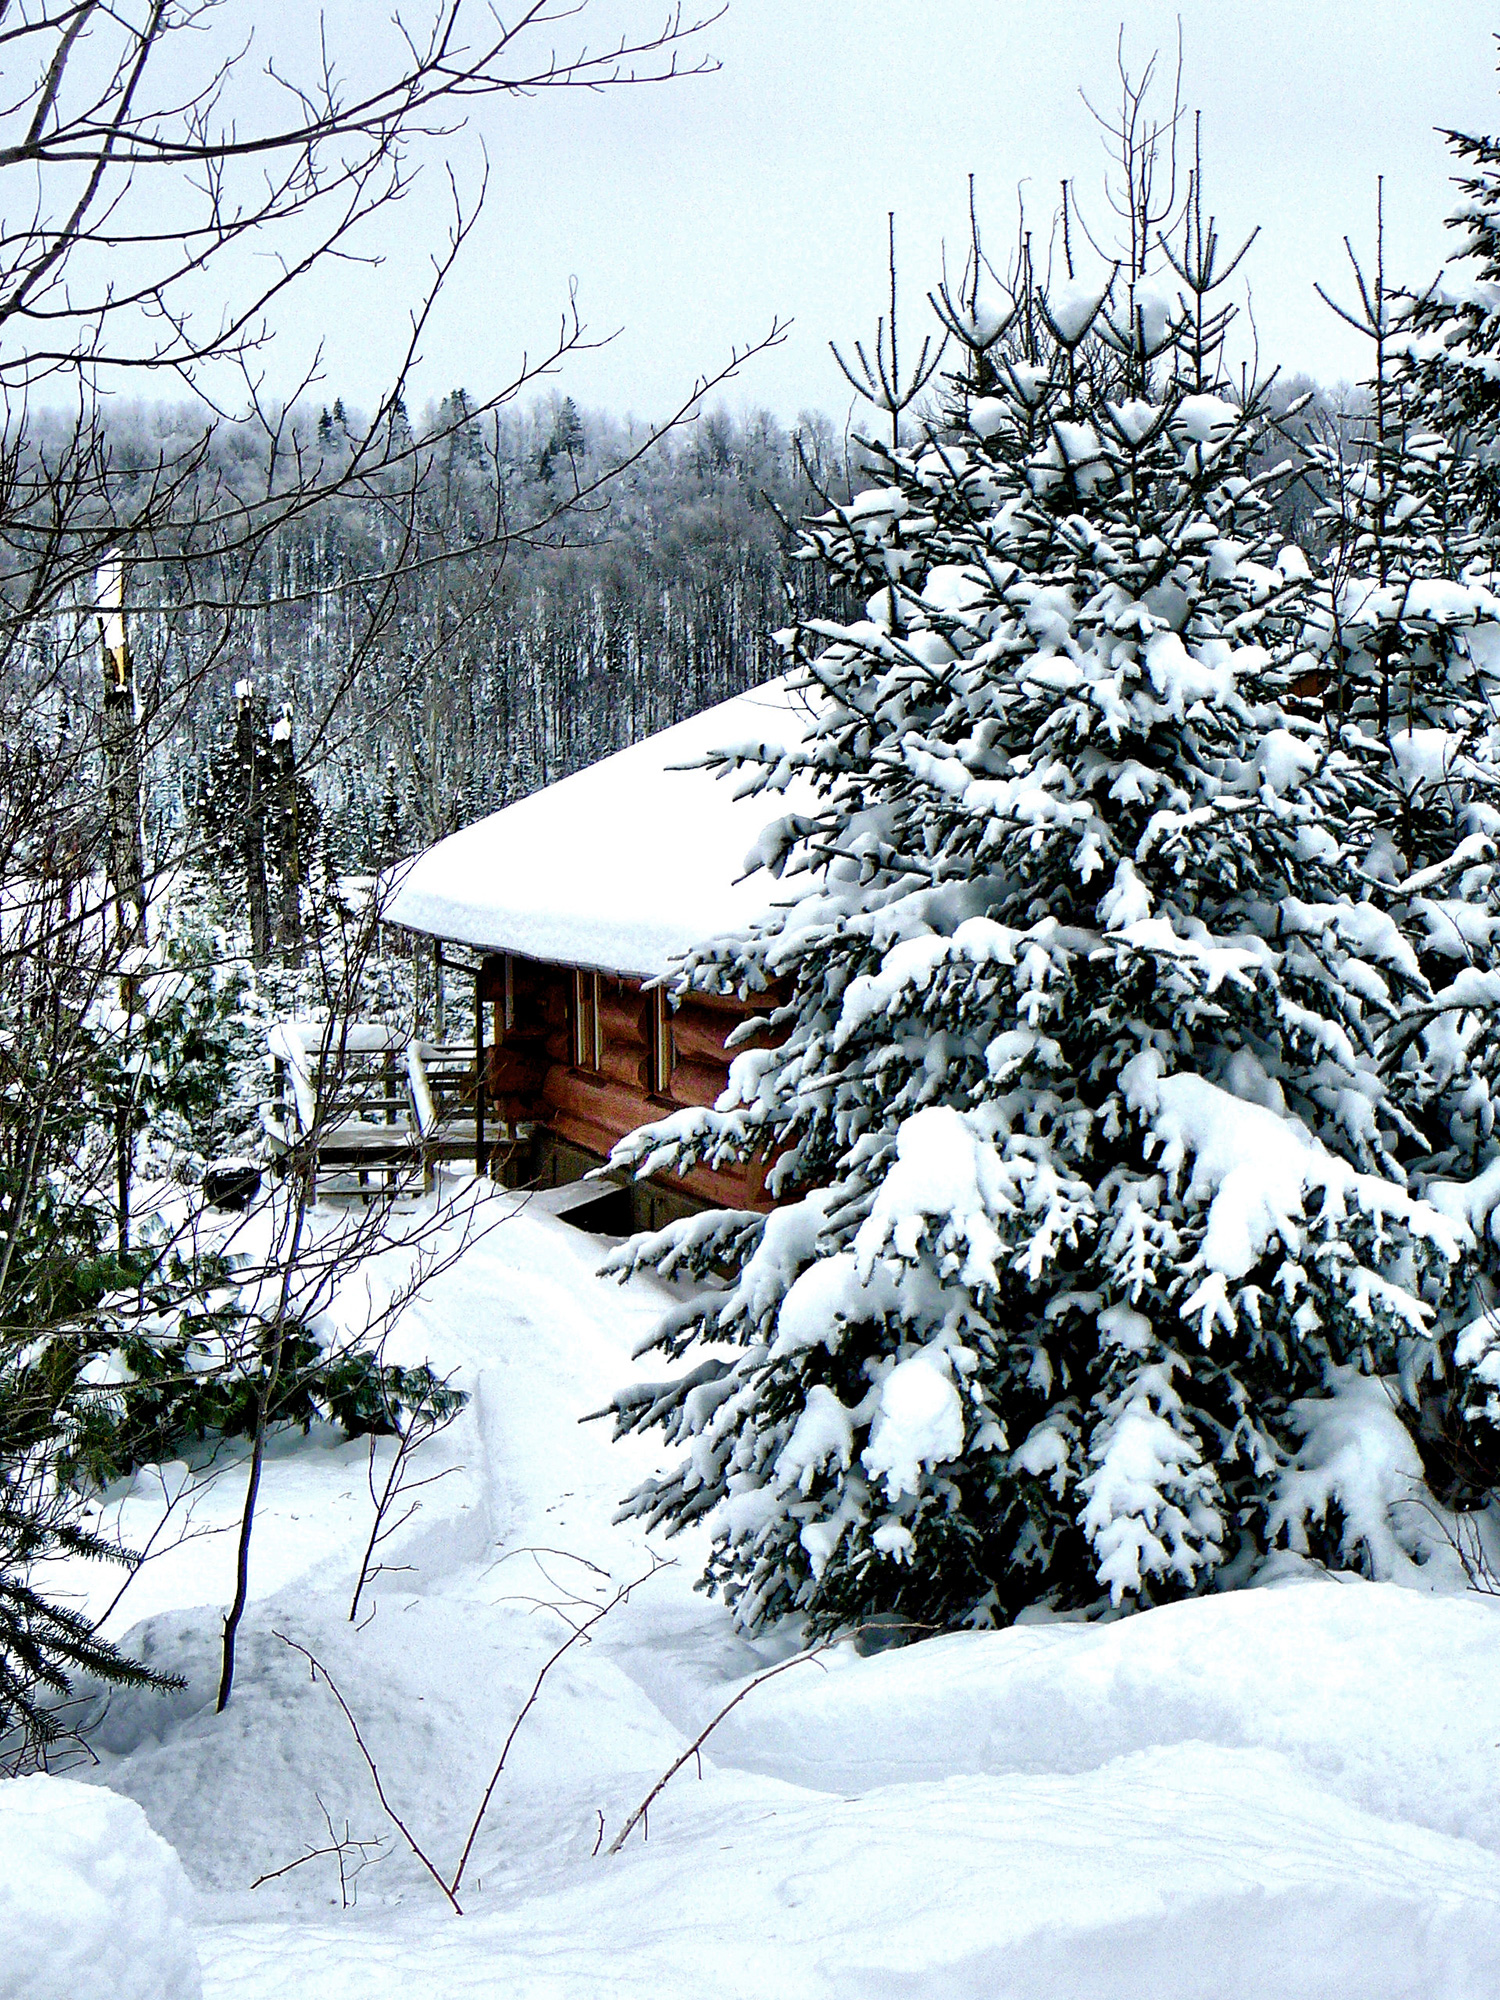 Log cabin in the winter behind pine trees covered in snow